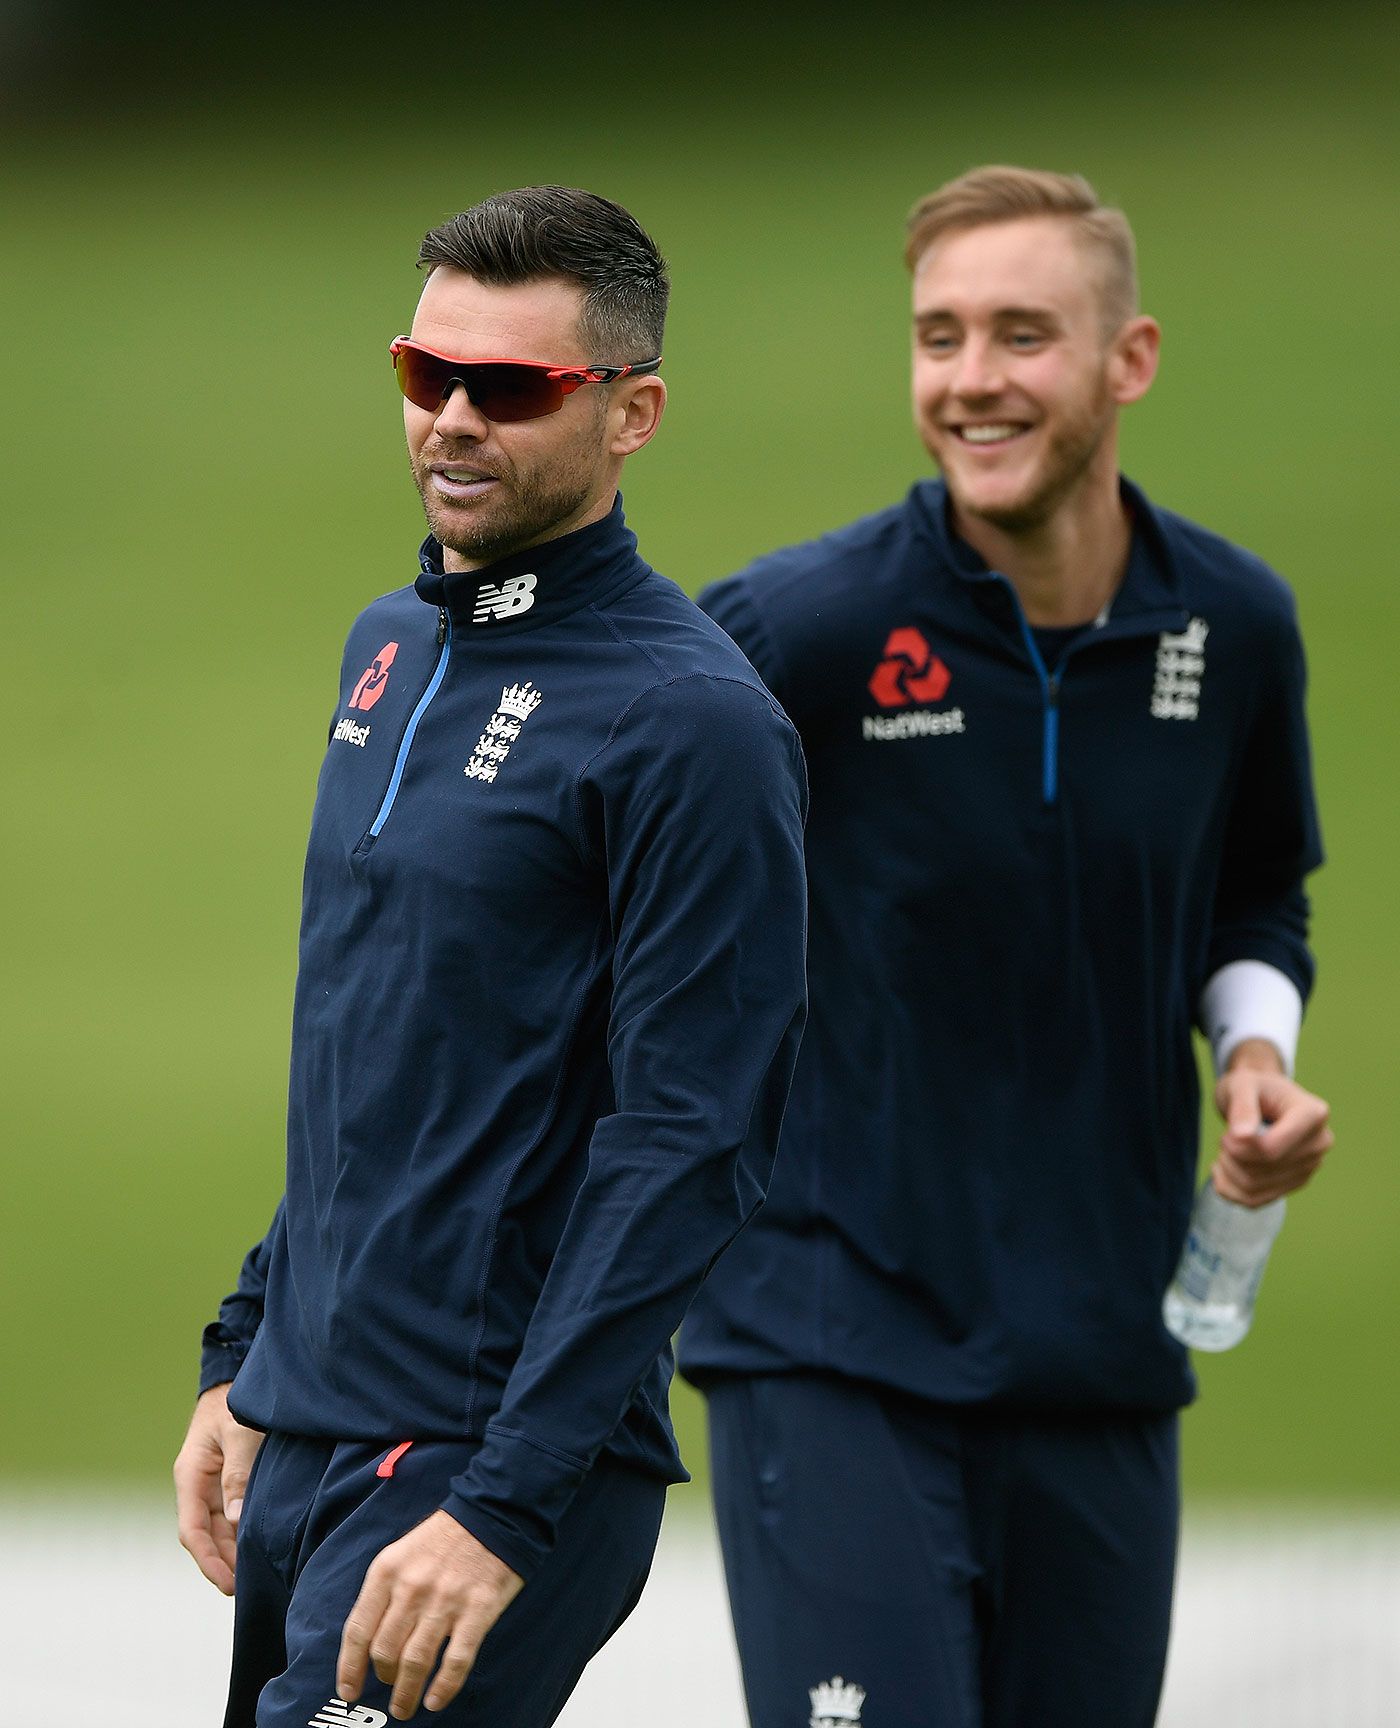 England vs Australia Ashes 2019: James Anderson ruled out of second Test  with injury